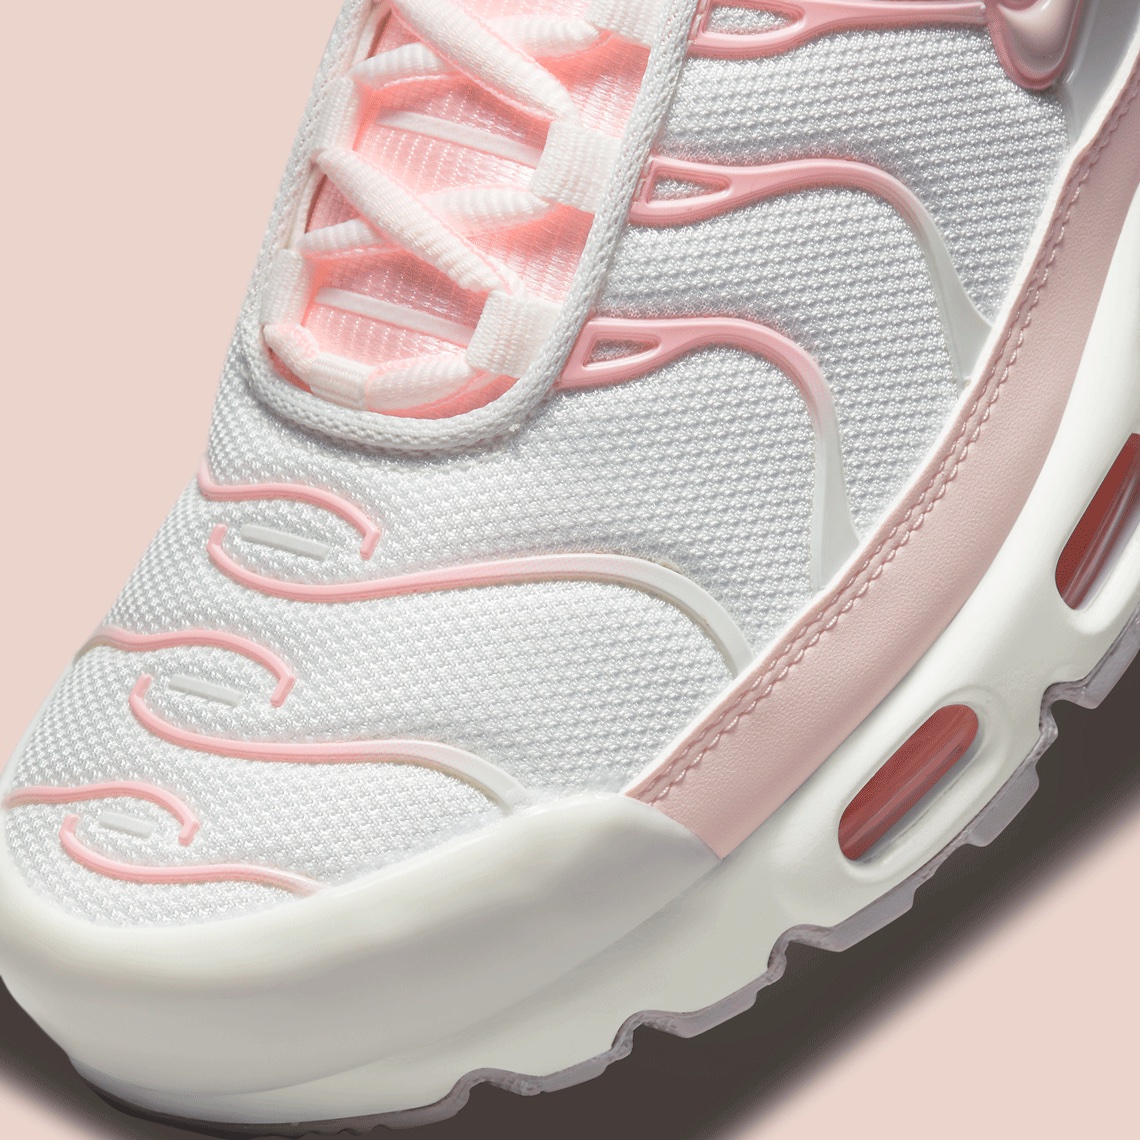 womens pink and white tns